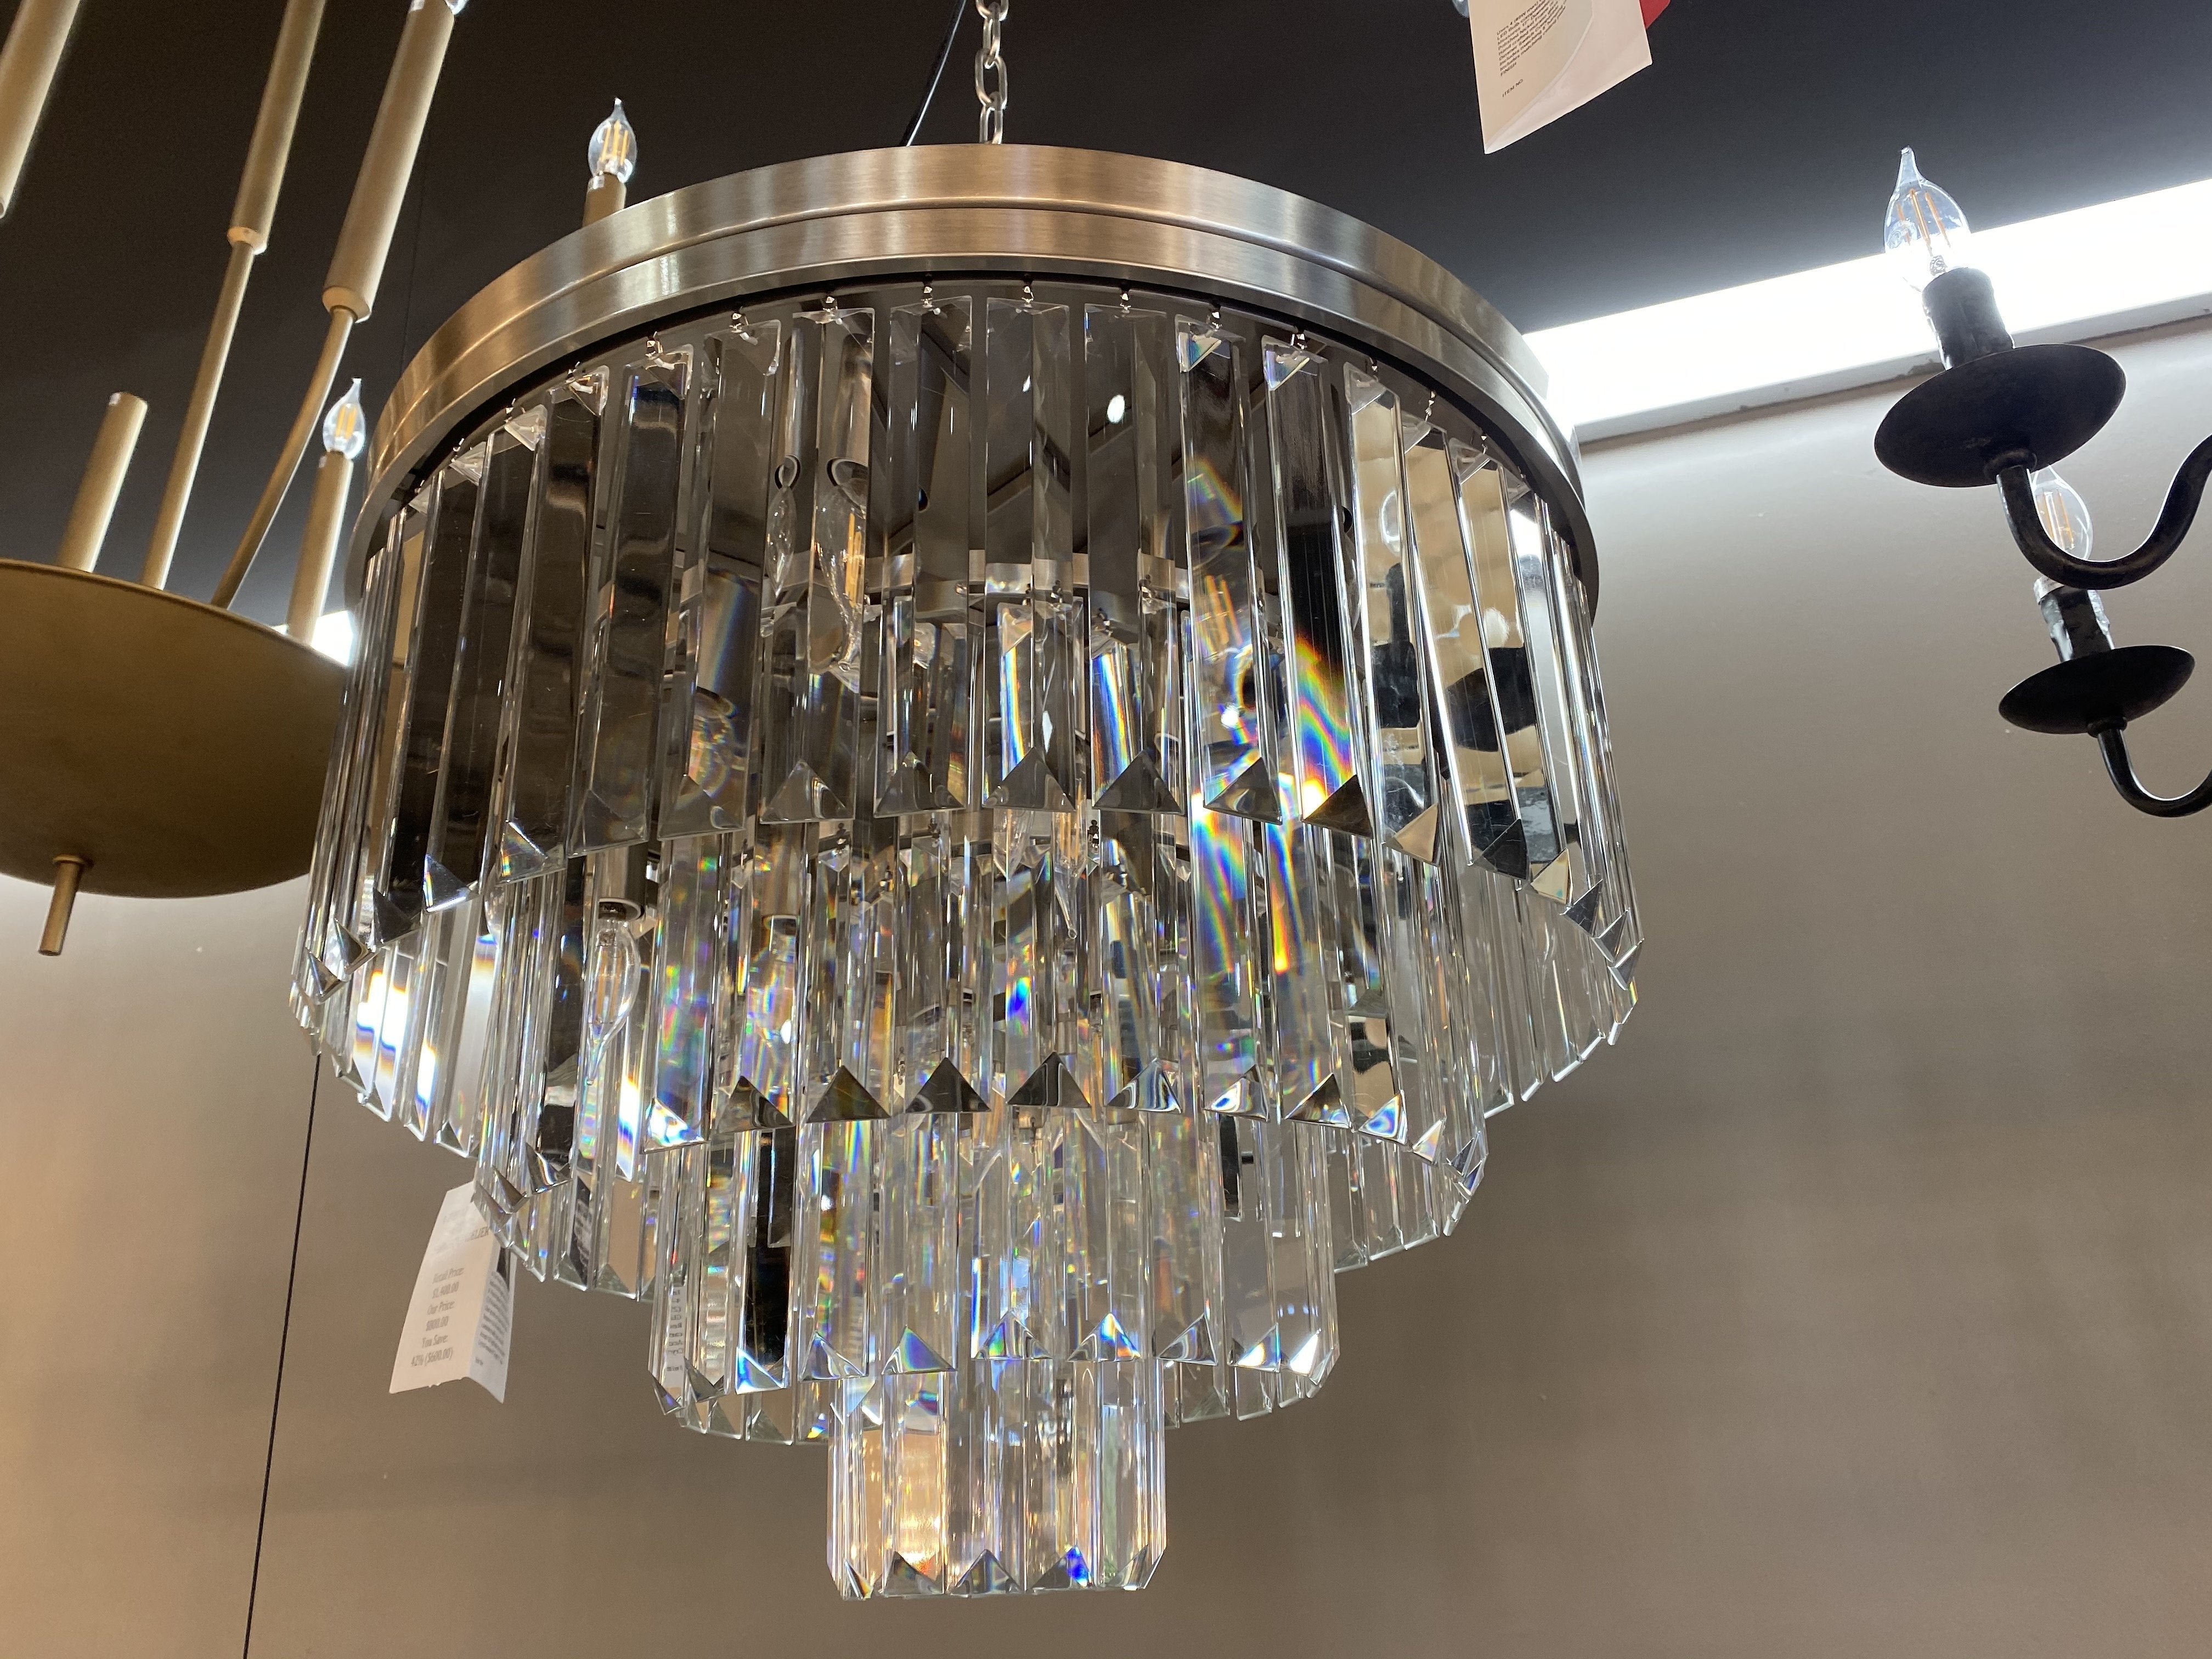 Odeon Round Crystal Fringe Chandelier Collection - Italian Concept